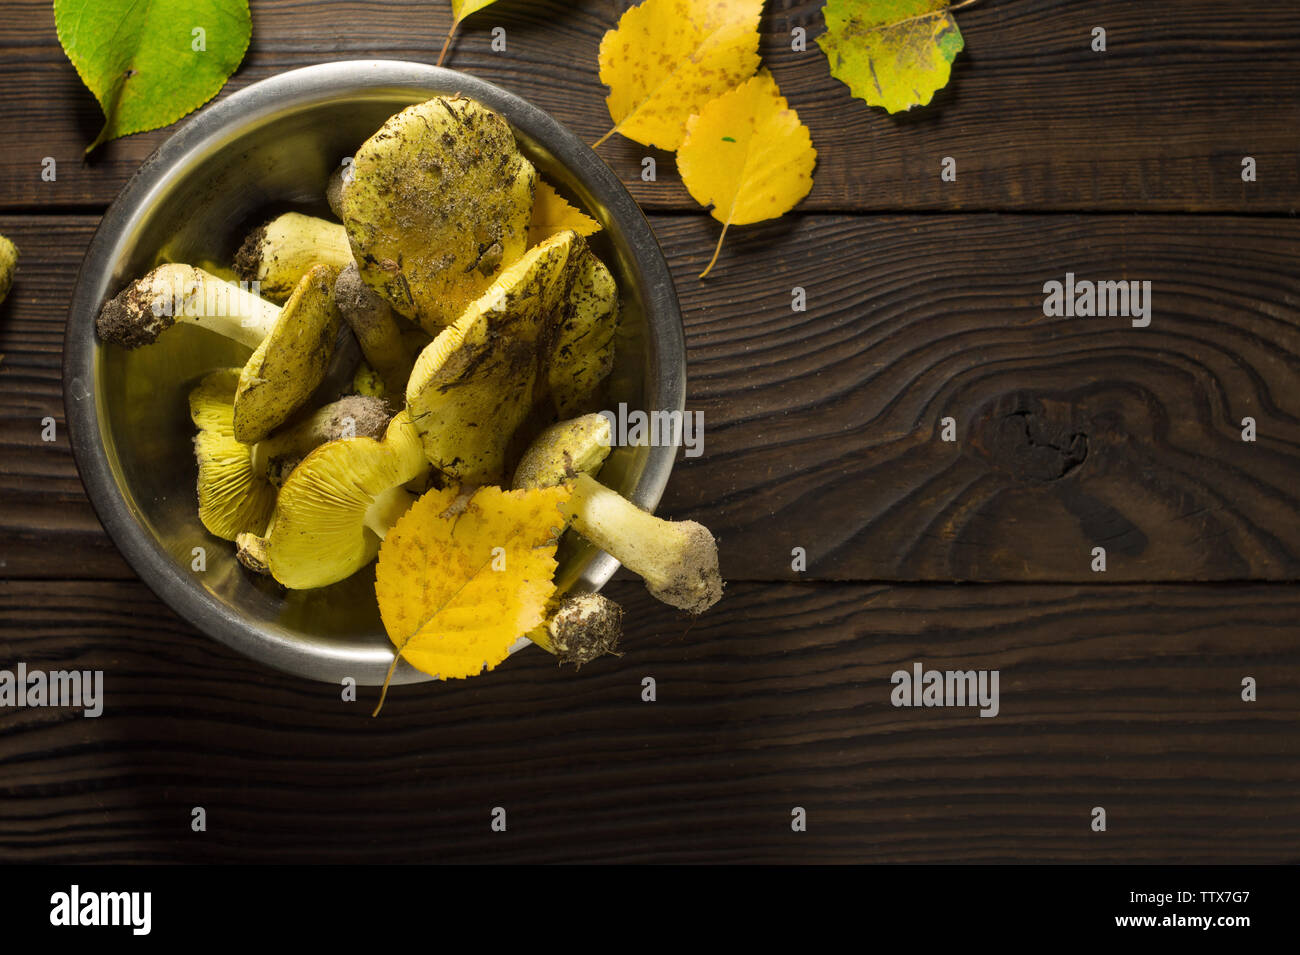 Fresh forest mushrooms tricholoma in a metal bowl on a wooden table Stock Photo